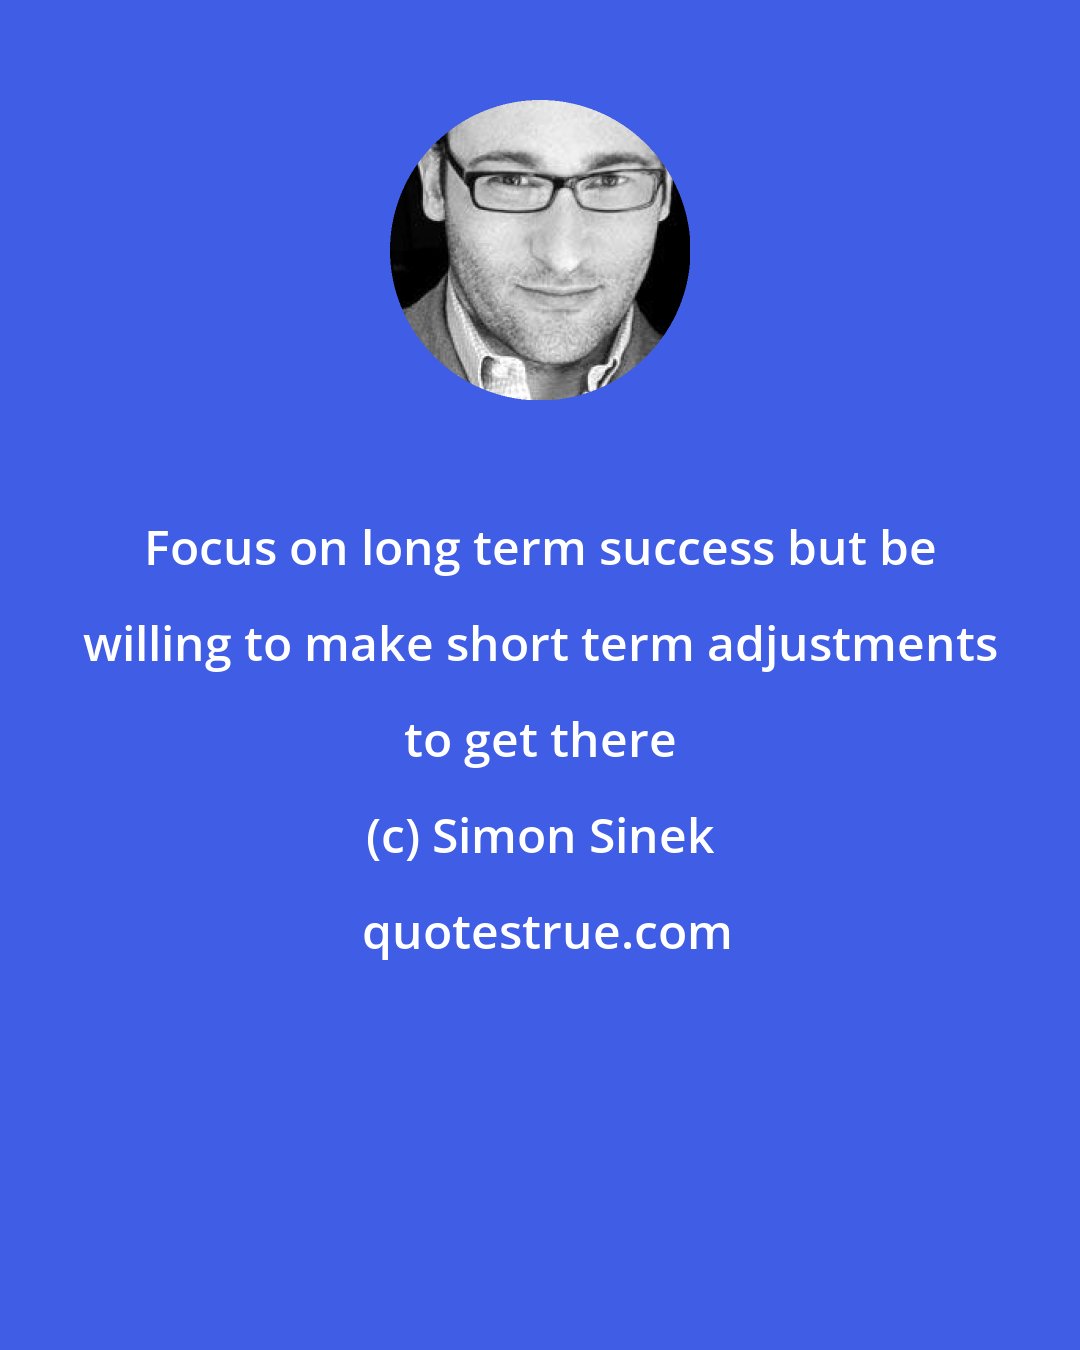 Simon Sinek: Focus on long term success but be willing to make short term adjustments to get there